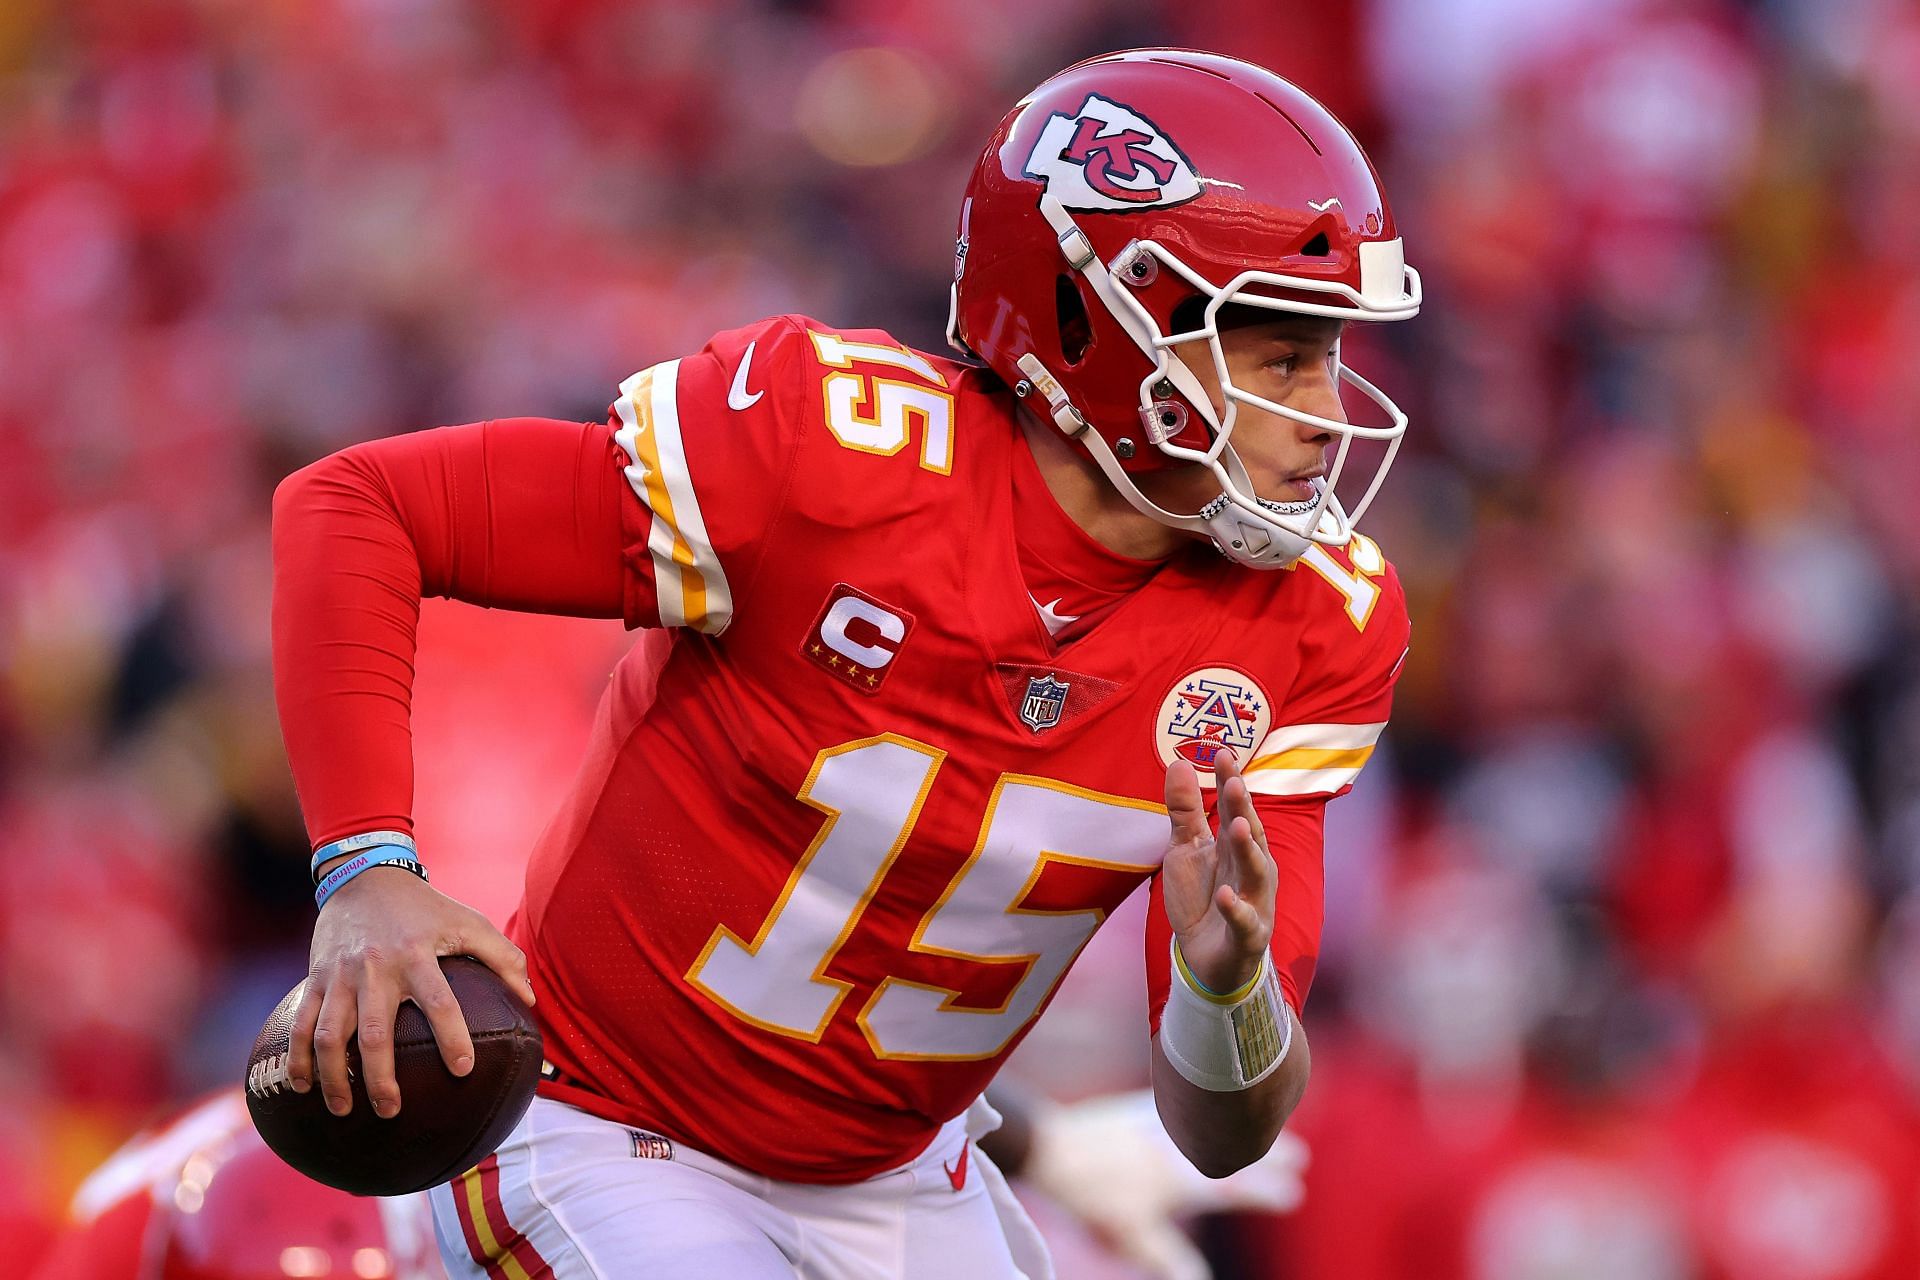 Kansas City Chiefs QB Patrick Mahomes is currently the highest paid player in the NFl